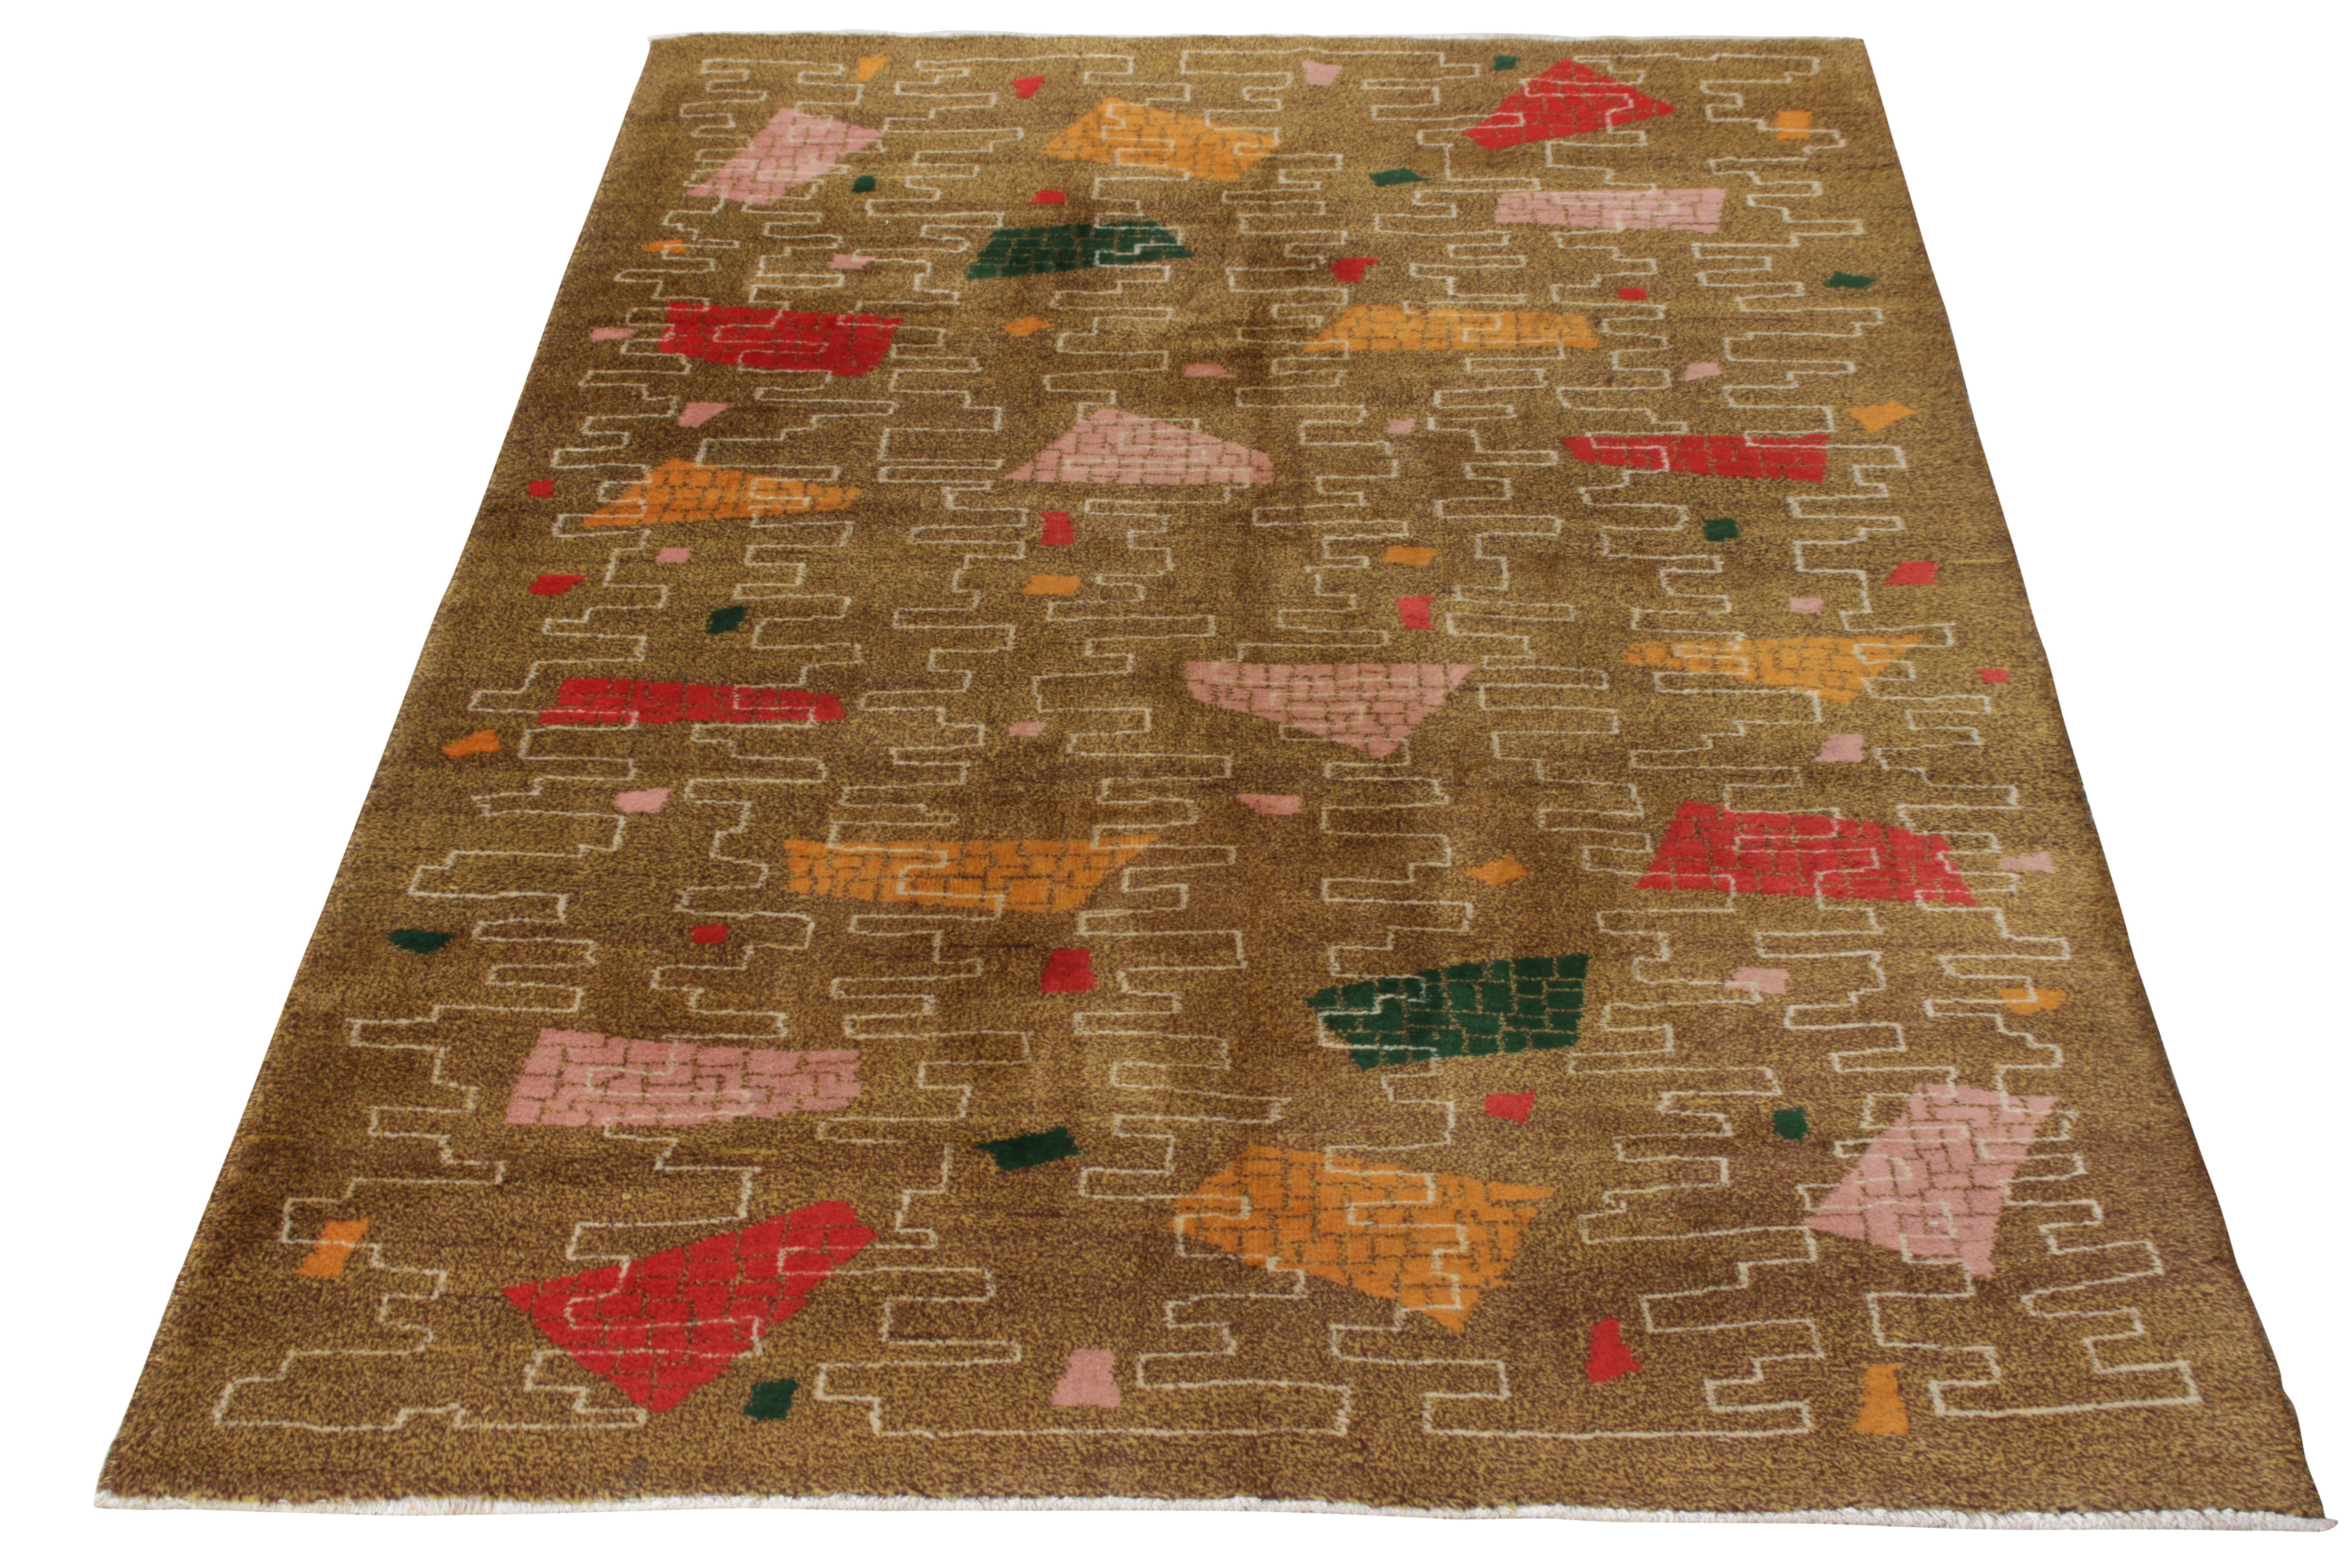 Hand-knotted in wool, this 5x8 vintage Turkish Art Deco rug joins Rug & Kilim’s Mid-Century Pasha Collection. This repertoire features the iconic works of the legendary designer Zeki Muren that showcases his wholehearted love for the 1960s style.